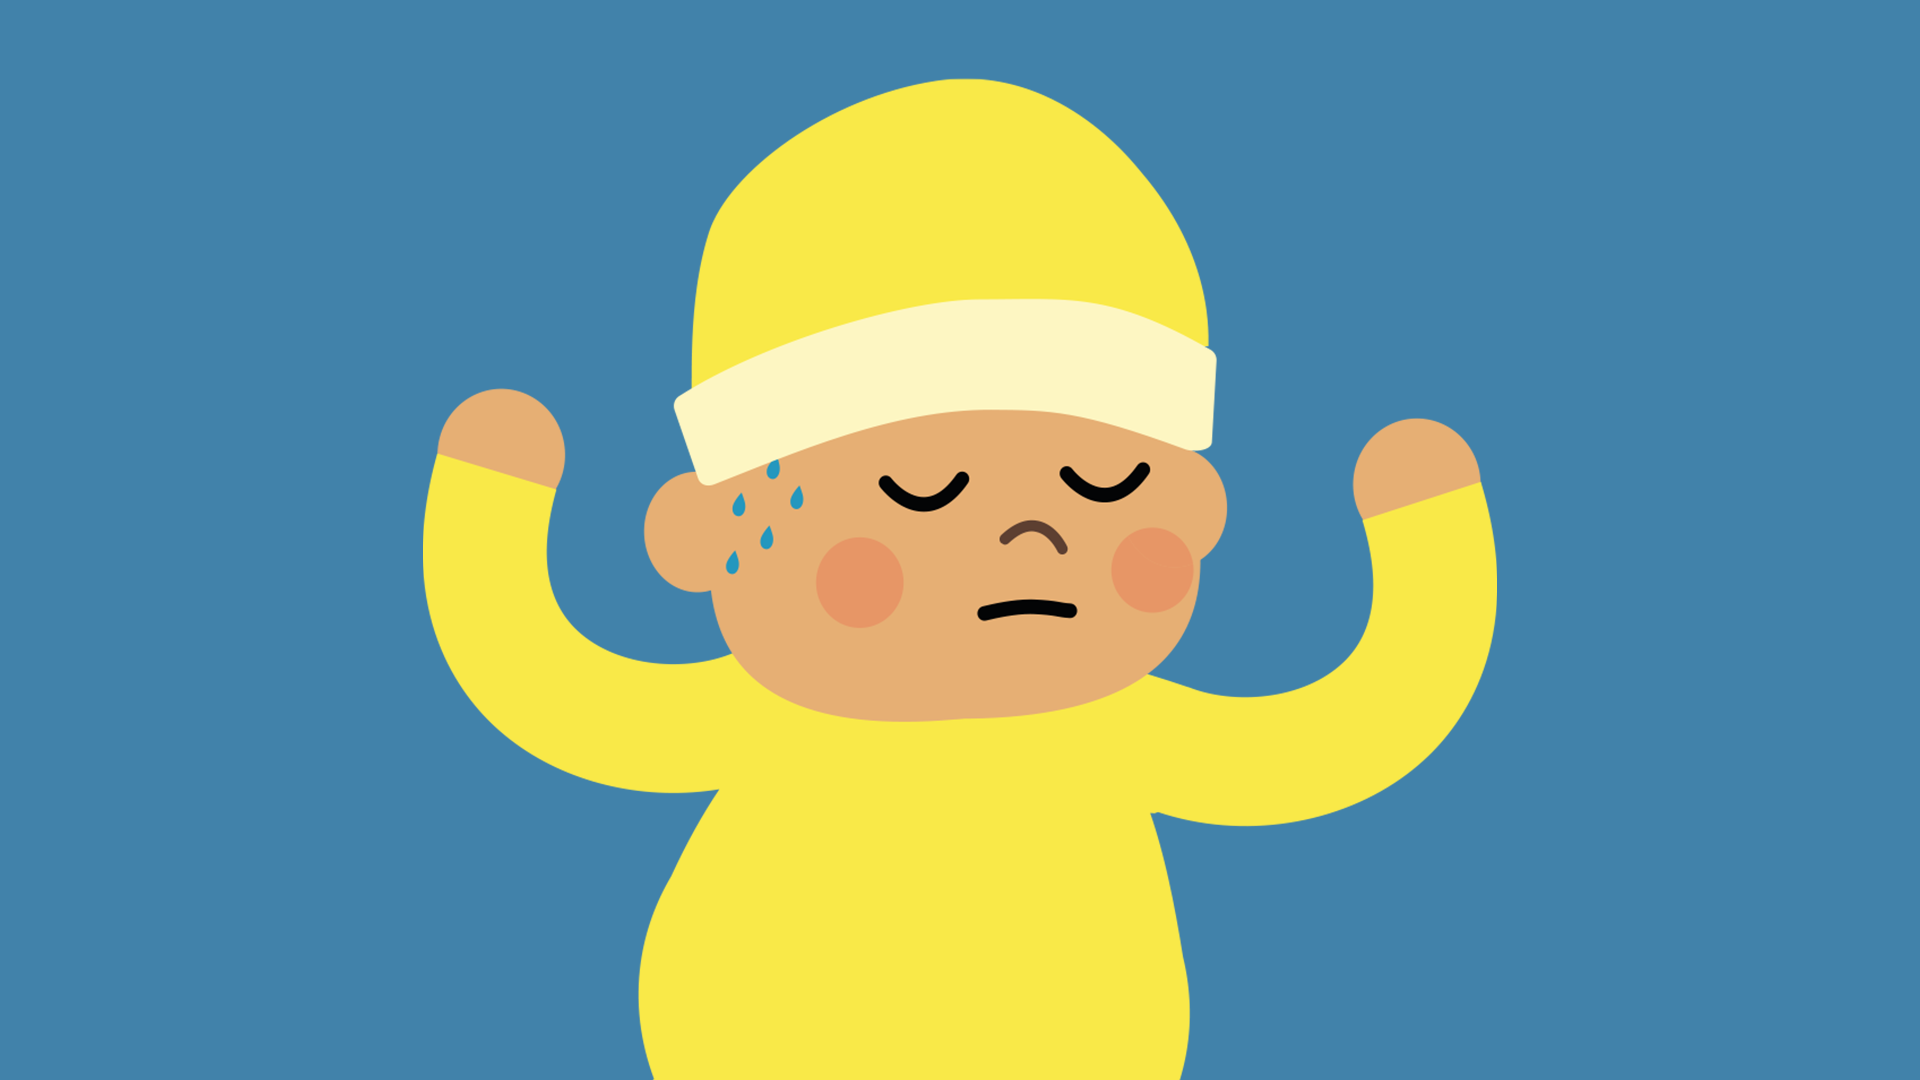 A baby is shown wearing a hat, their cheeks are flushing red and they are sweating due to being too warm